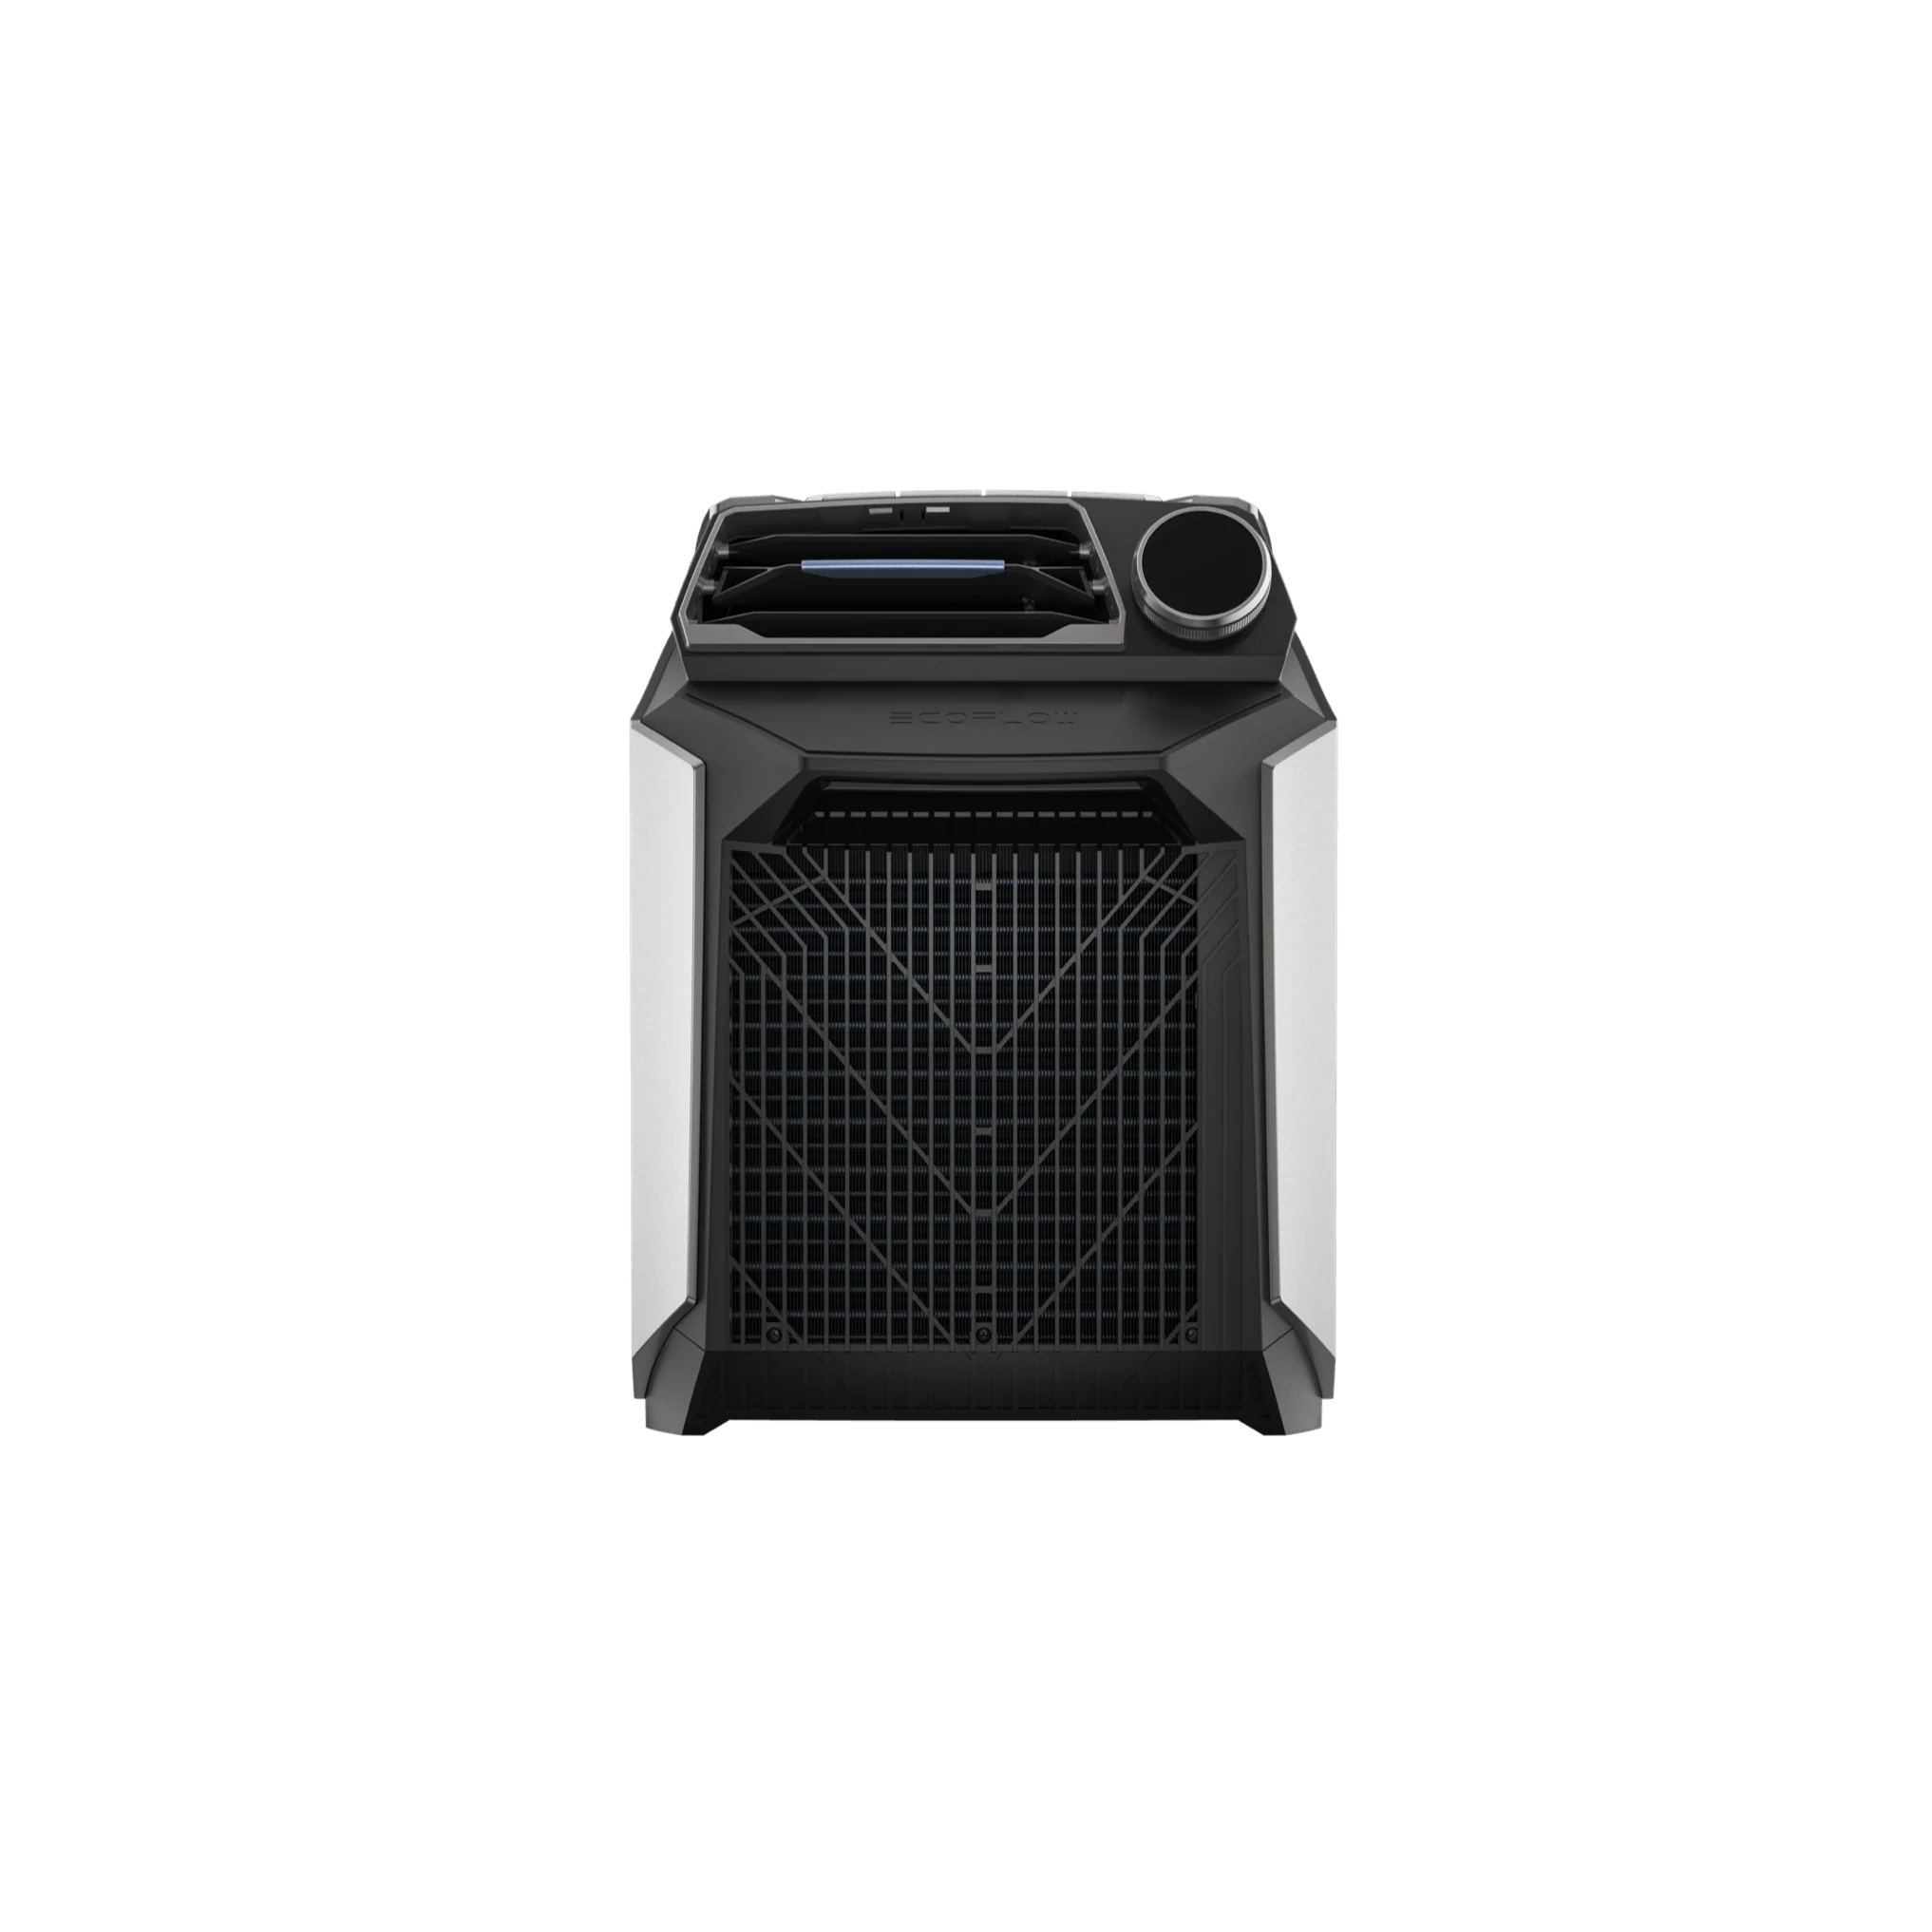 EcoFlow Wave Portable Air Conditioner in black and white (SHIPS IN 1-2 WEEKS) on a white background.